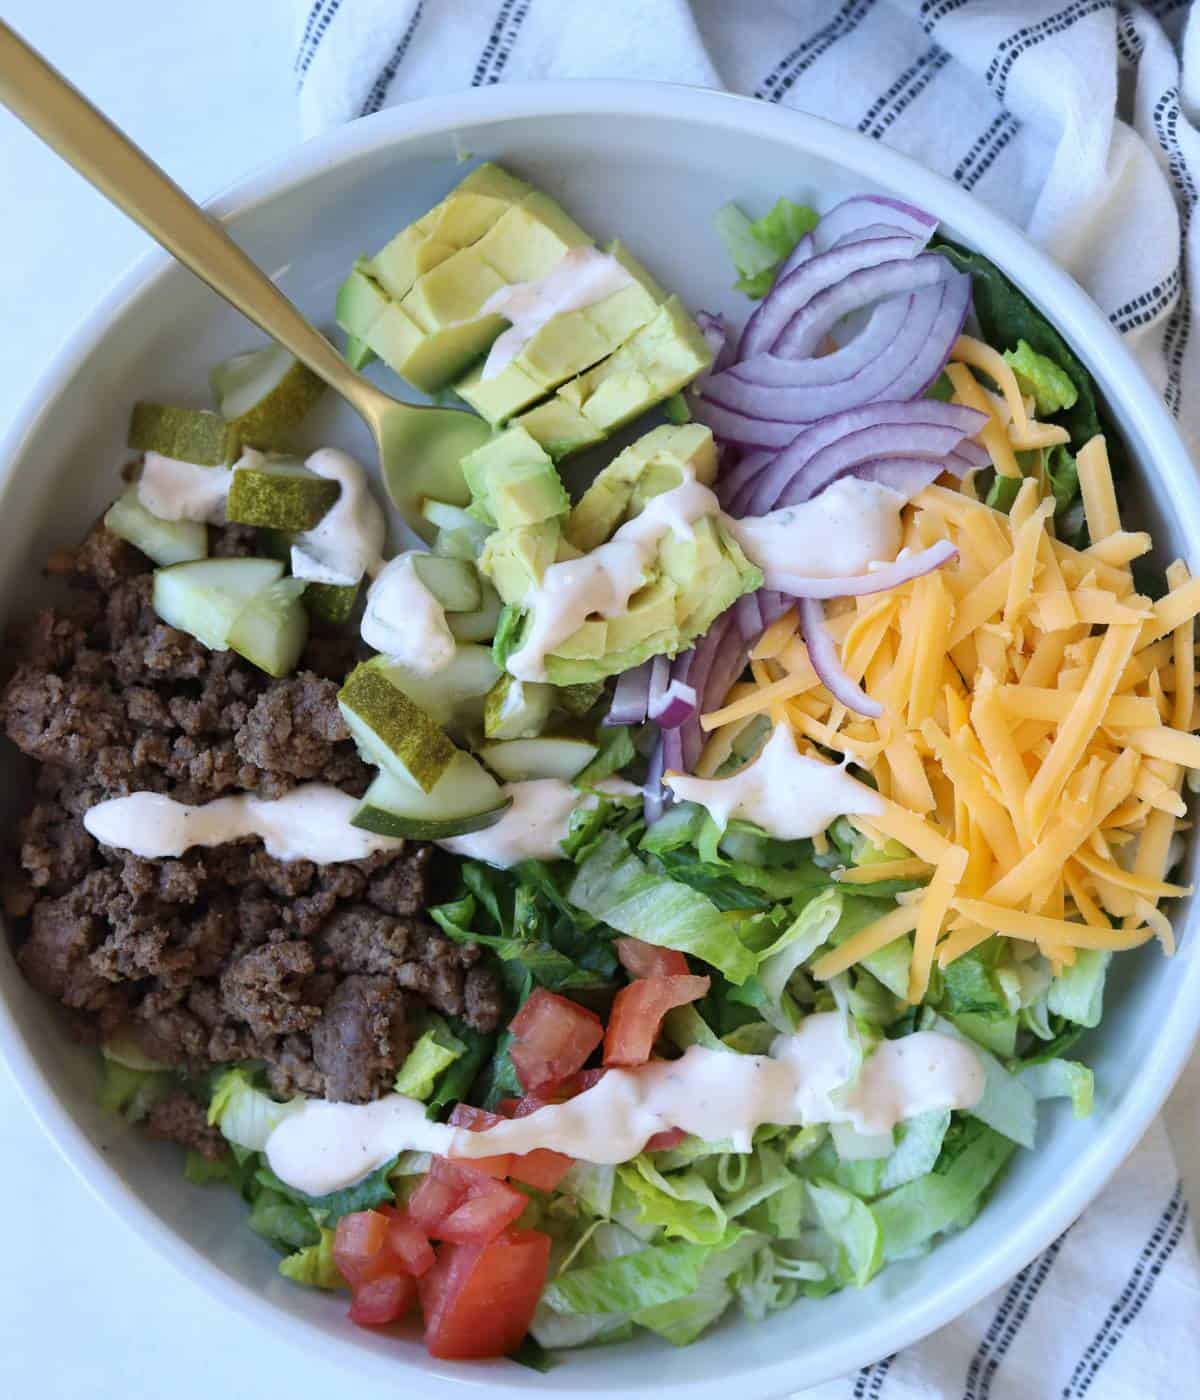 Cheeseburger bowls with ground beef, cheese, and veggies.